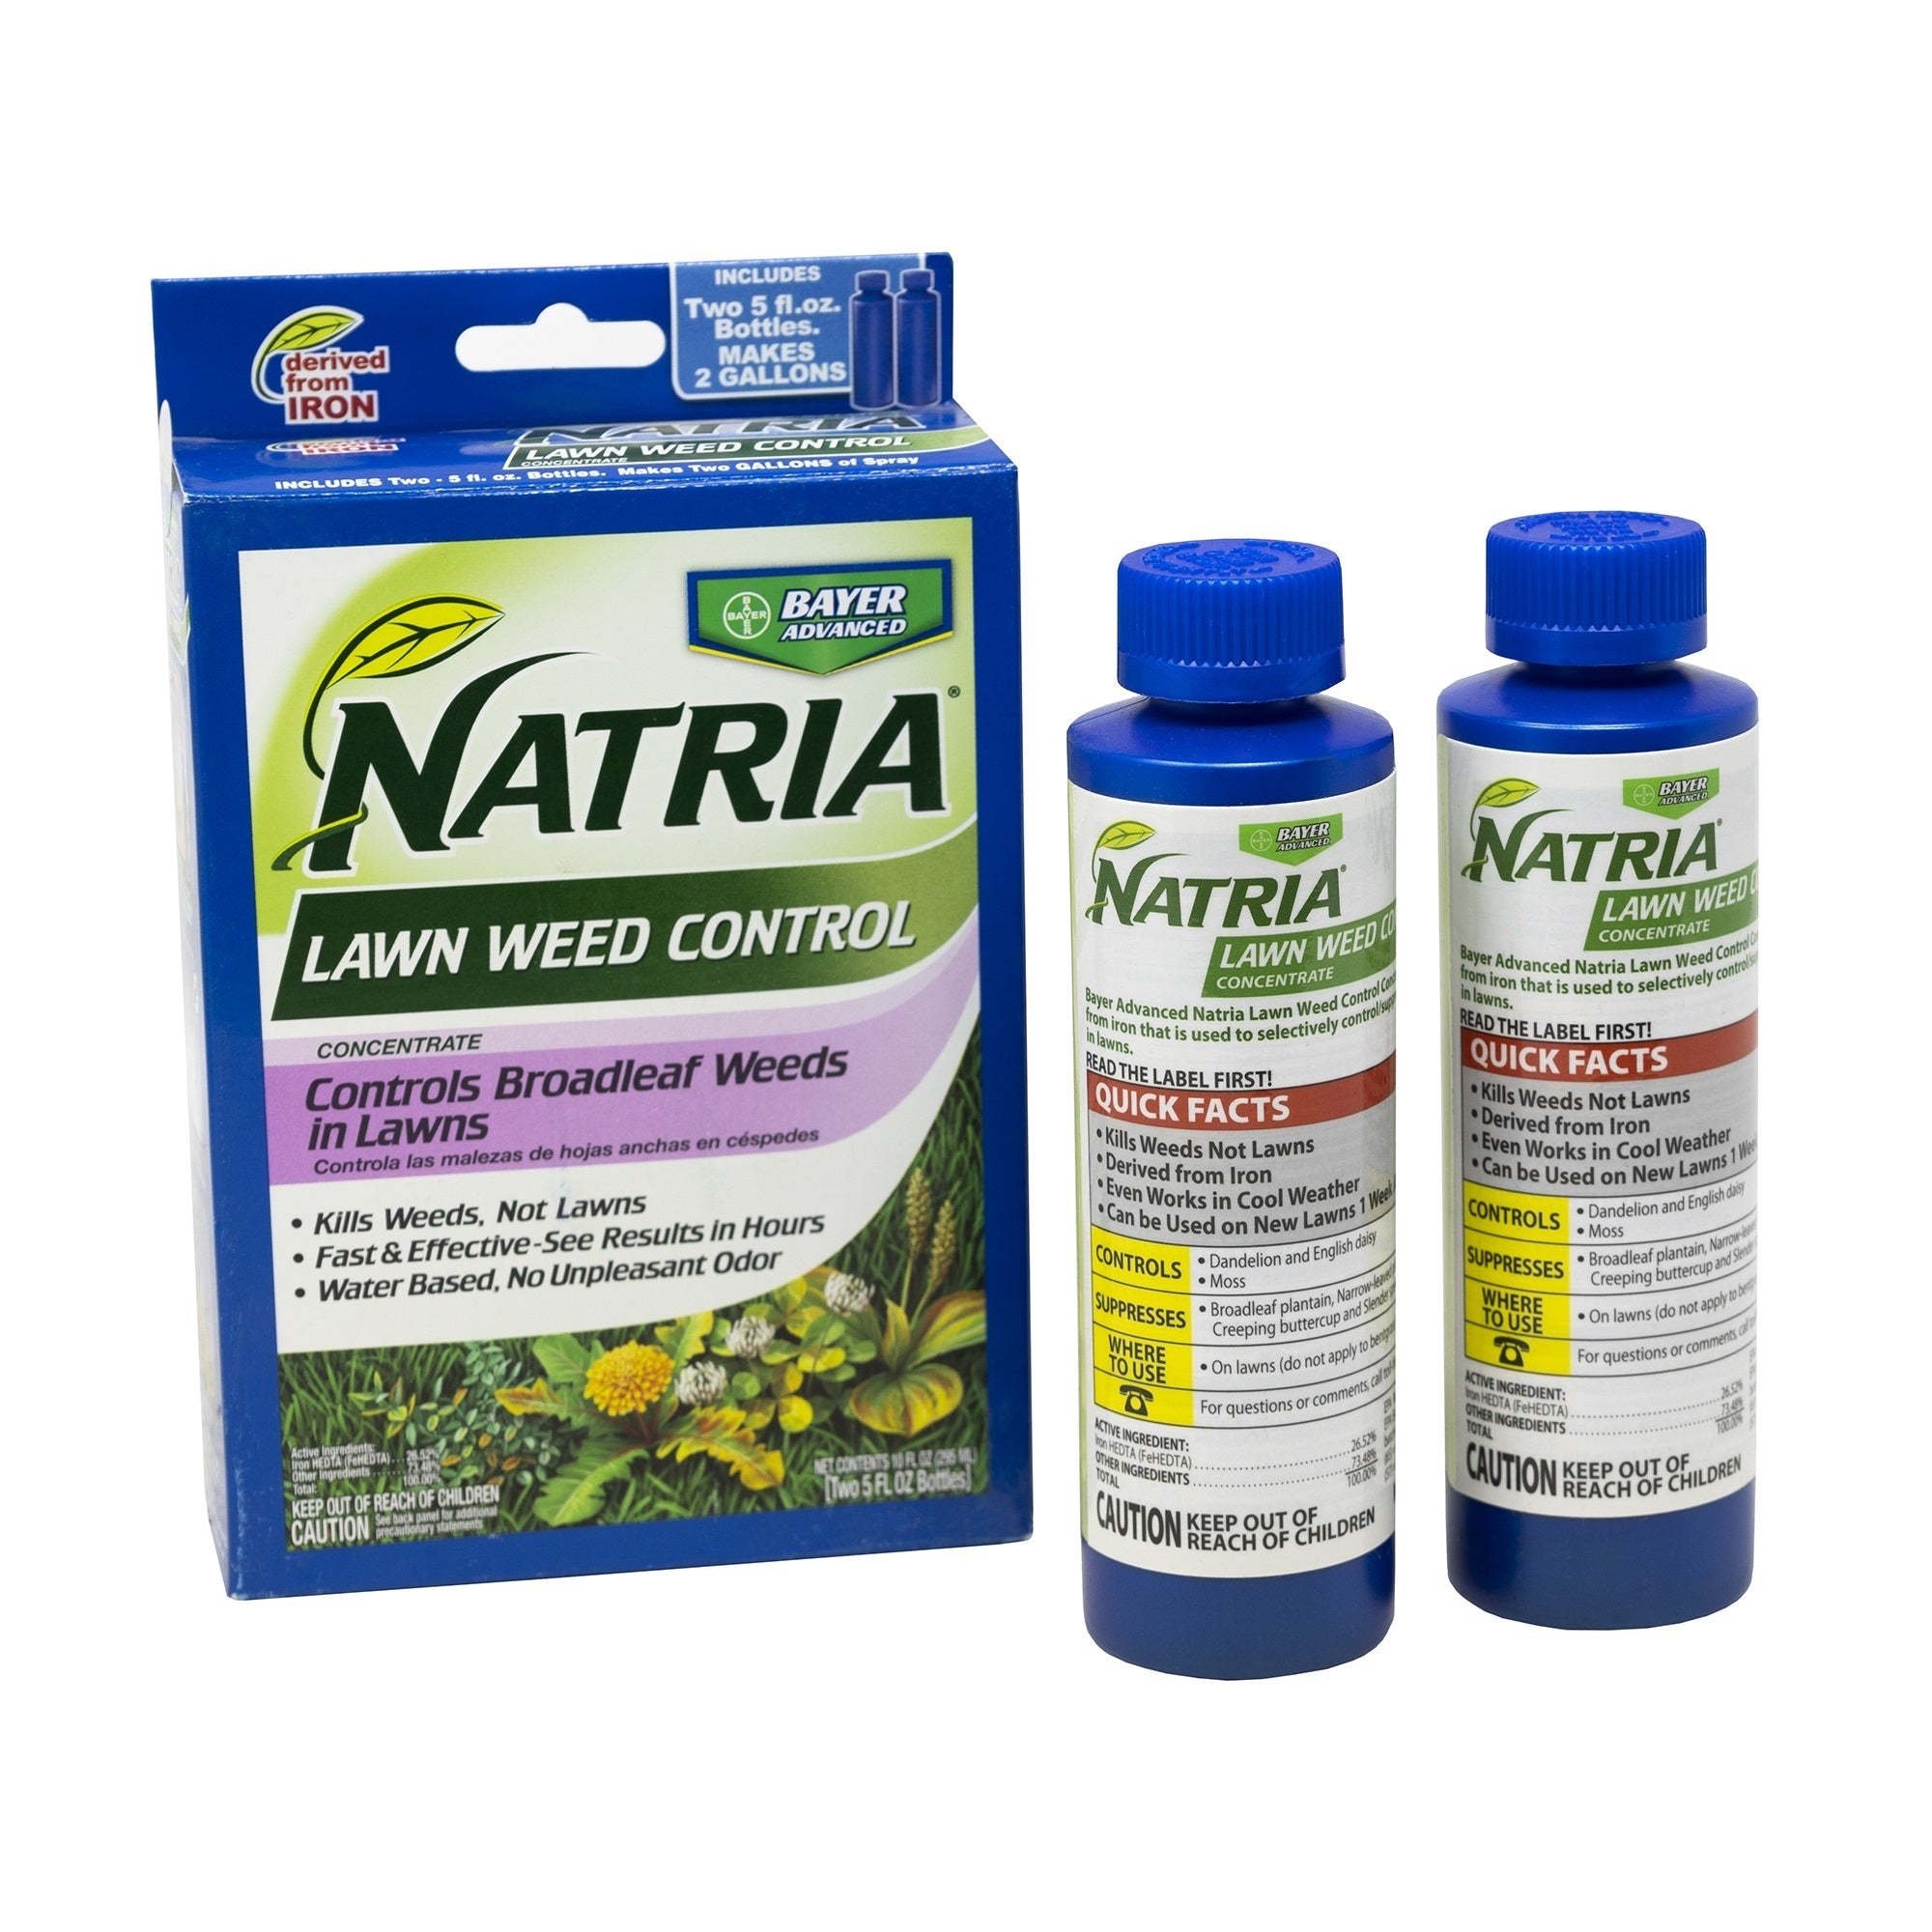 Natria Lawn Weed Killer Herbicide Concentrate, 2 Bottles, 10 Ounces